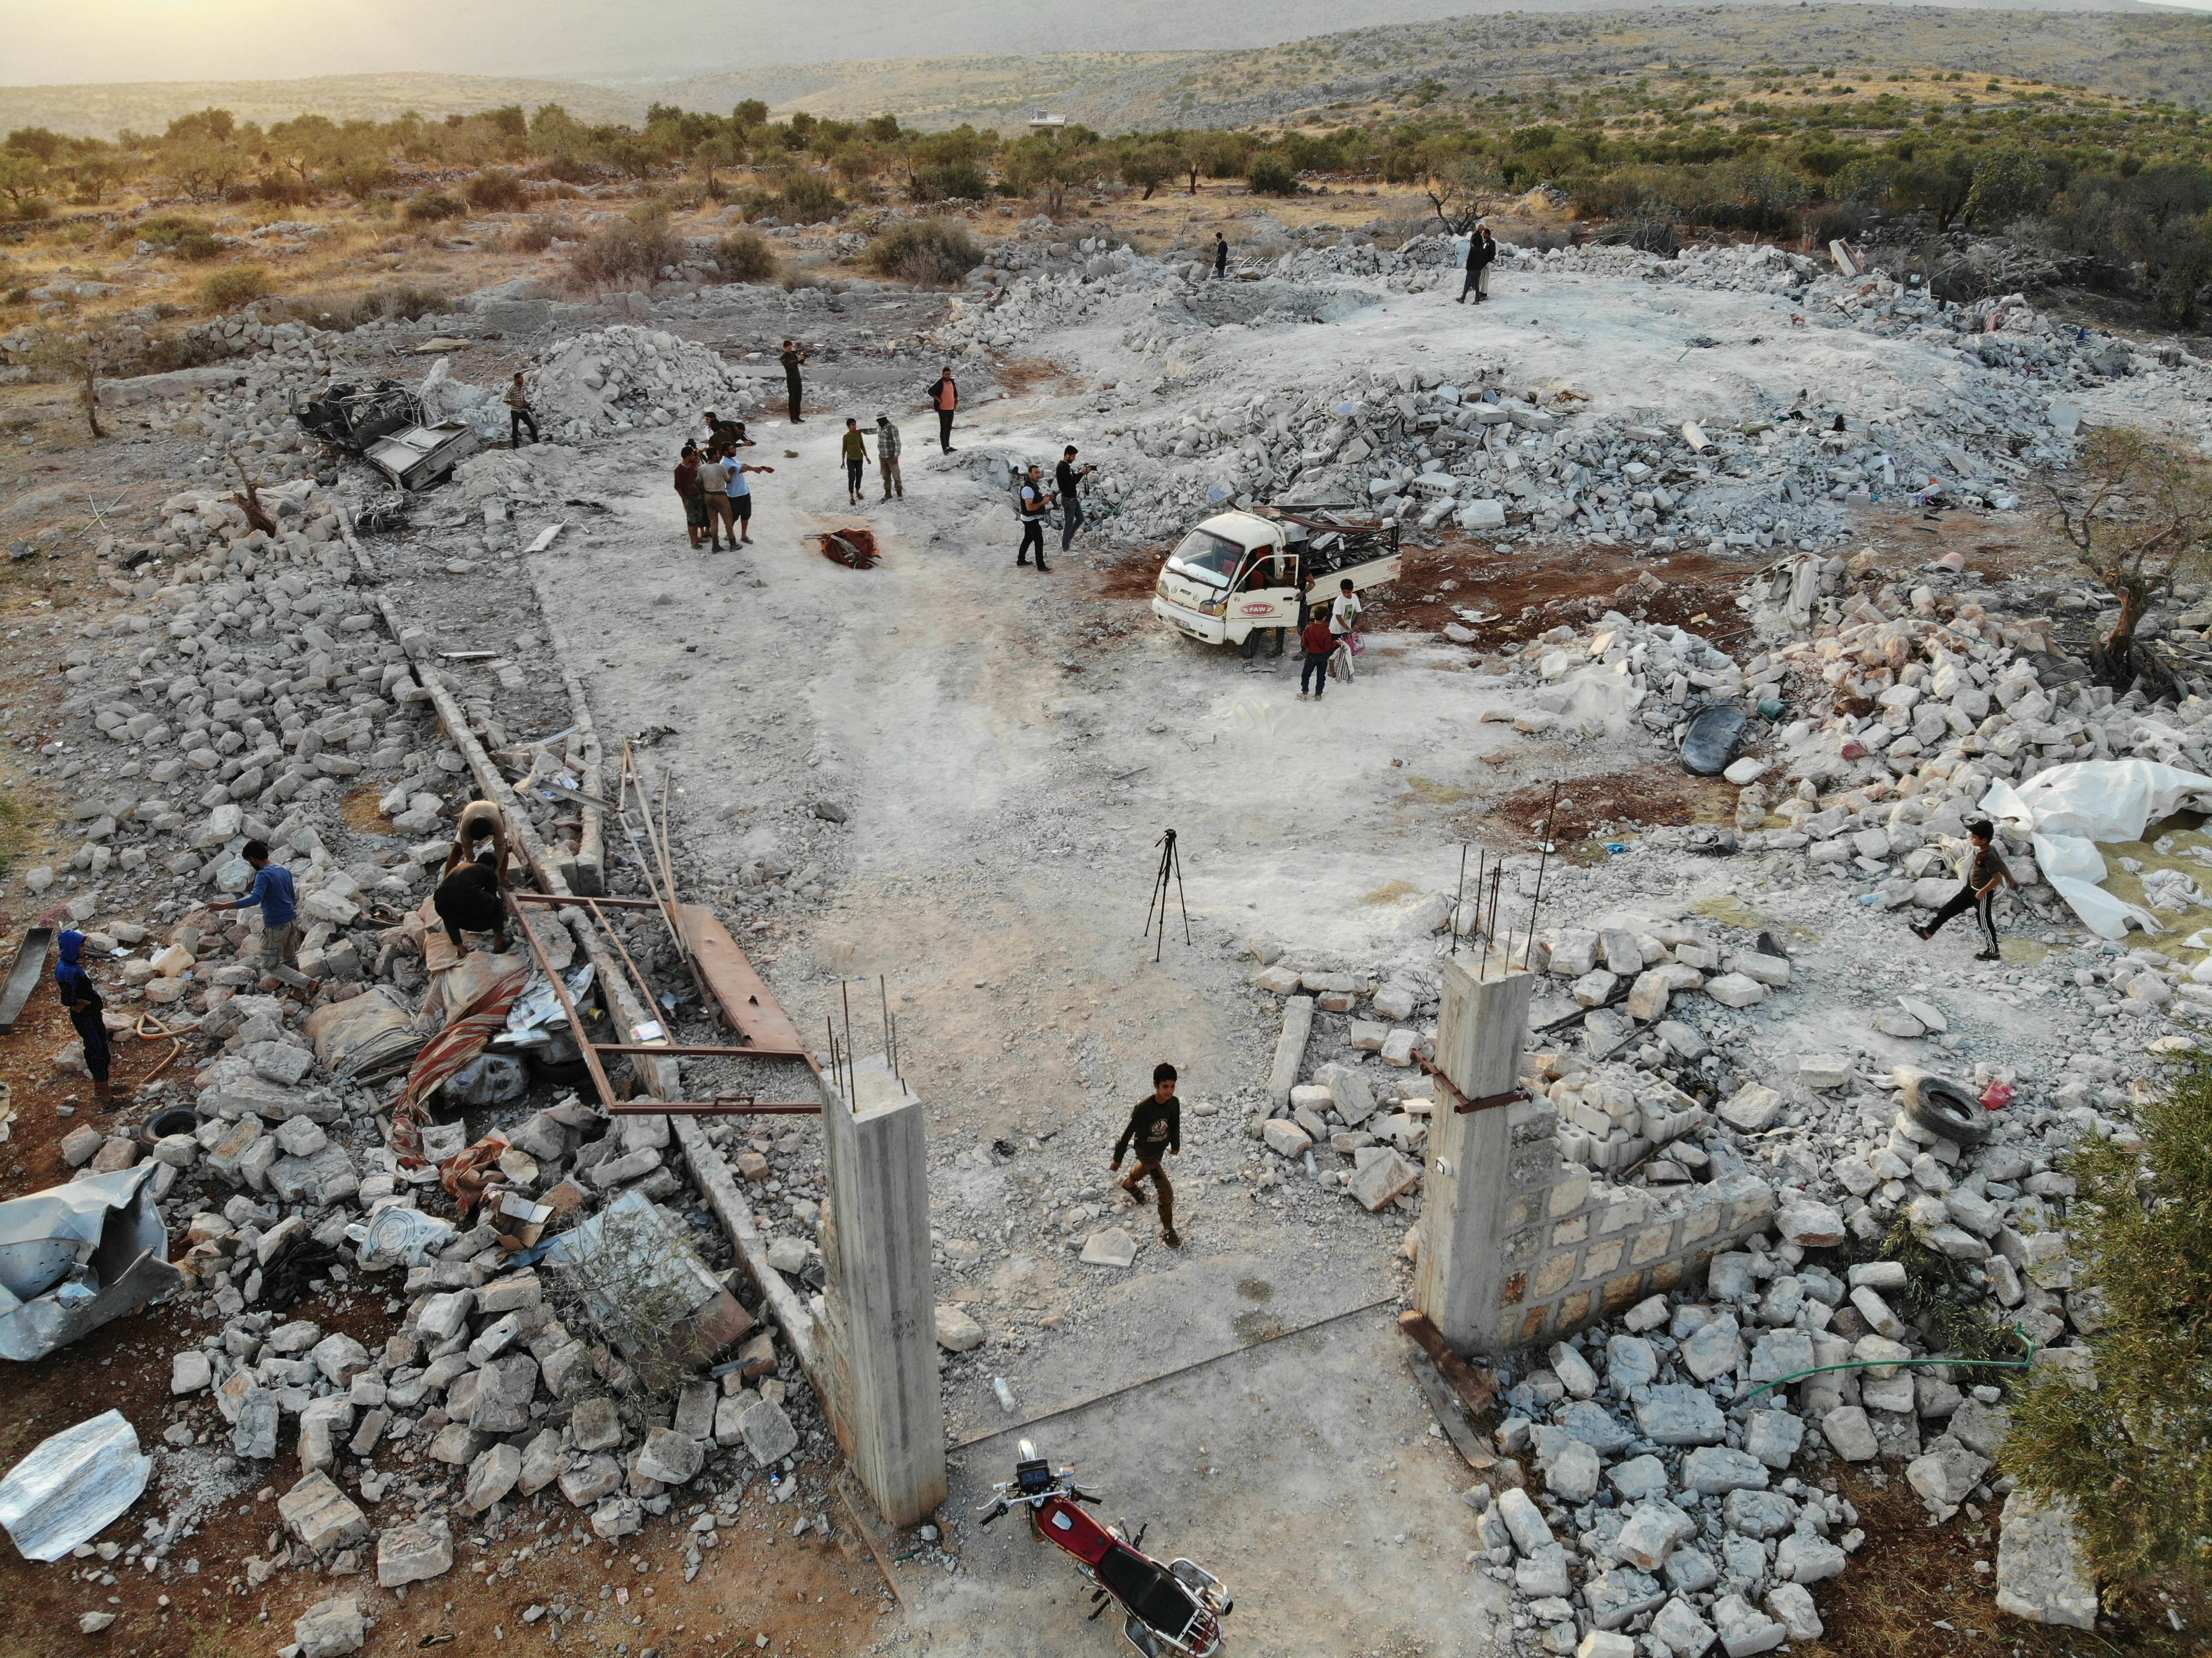 An aerial view taken on October 27, 2019 shows the site that was hit by helicopter gunfire which reportedly killed nine people near the northwestern Syrian village of Barisha in the Idlib province along the border with Turkey, where "groups linked to the Islamic State (IS) group" were present, according to a Britain-based war monitor with sources inside Syria. (OMAR HAJ KADOUR/AFP via Getty Images)